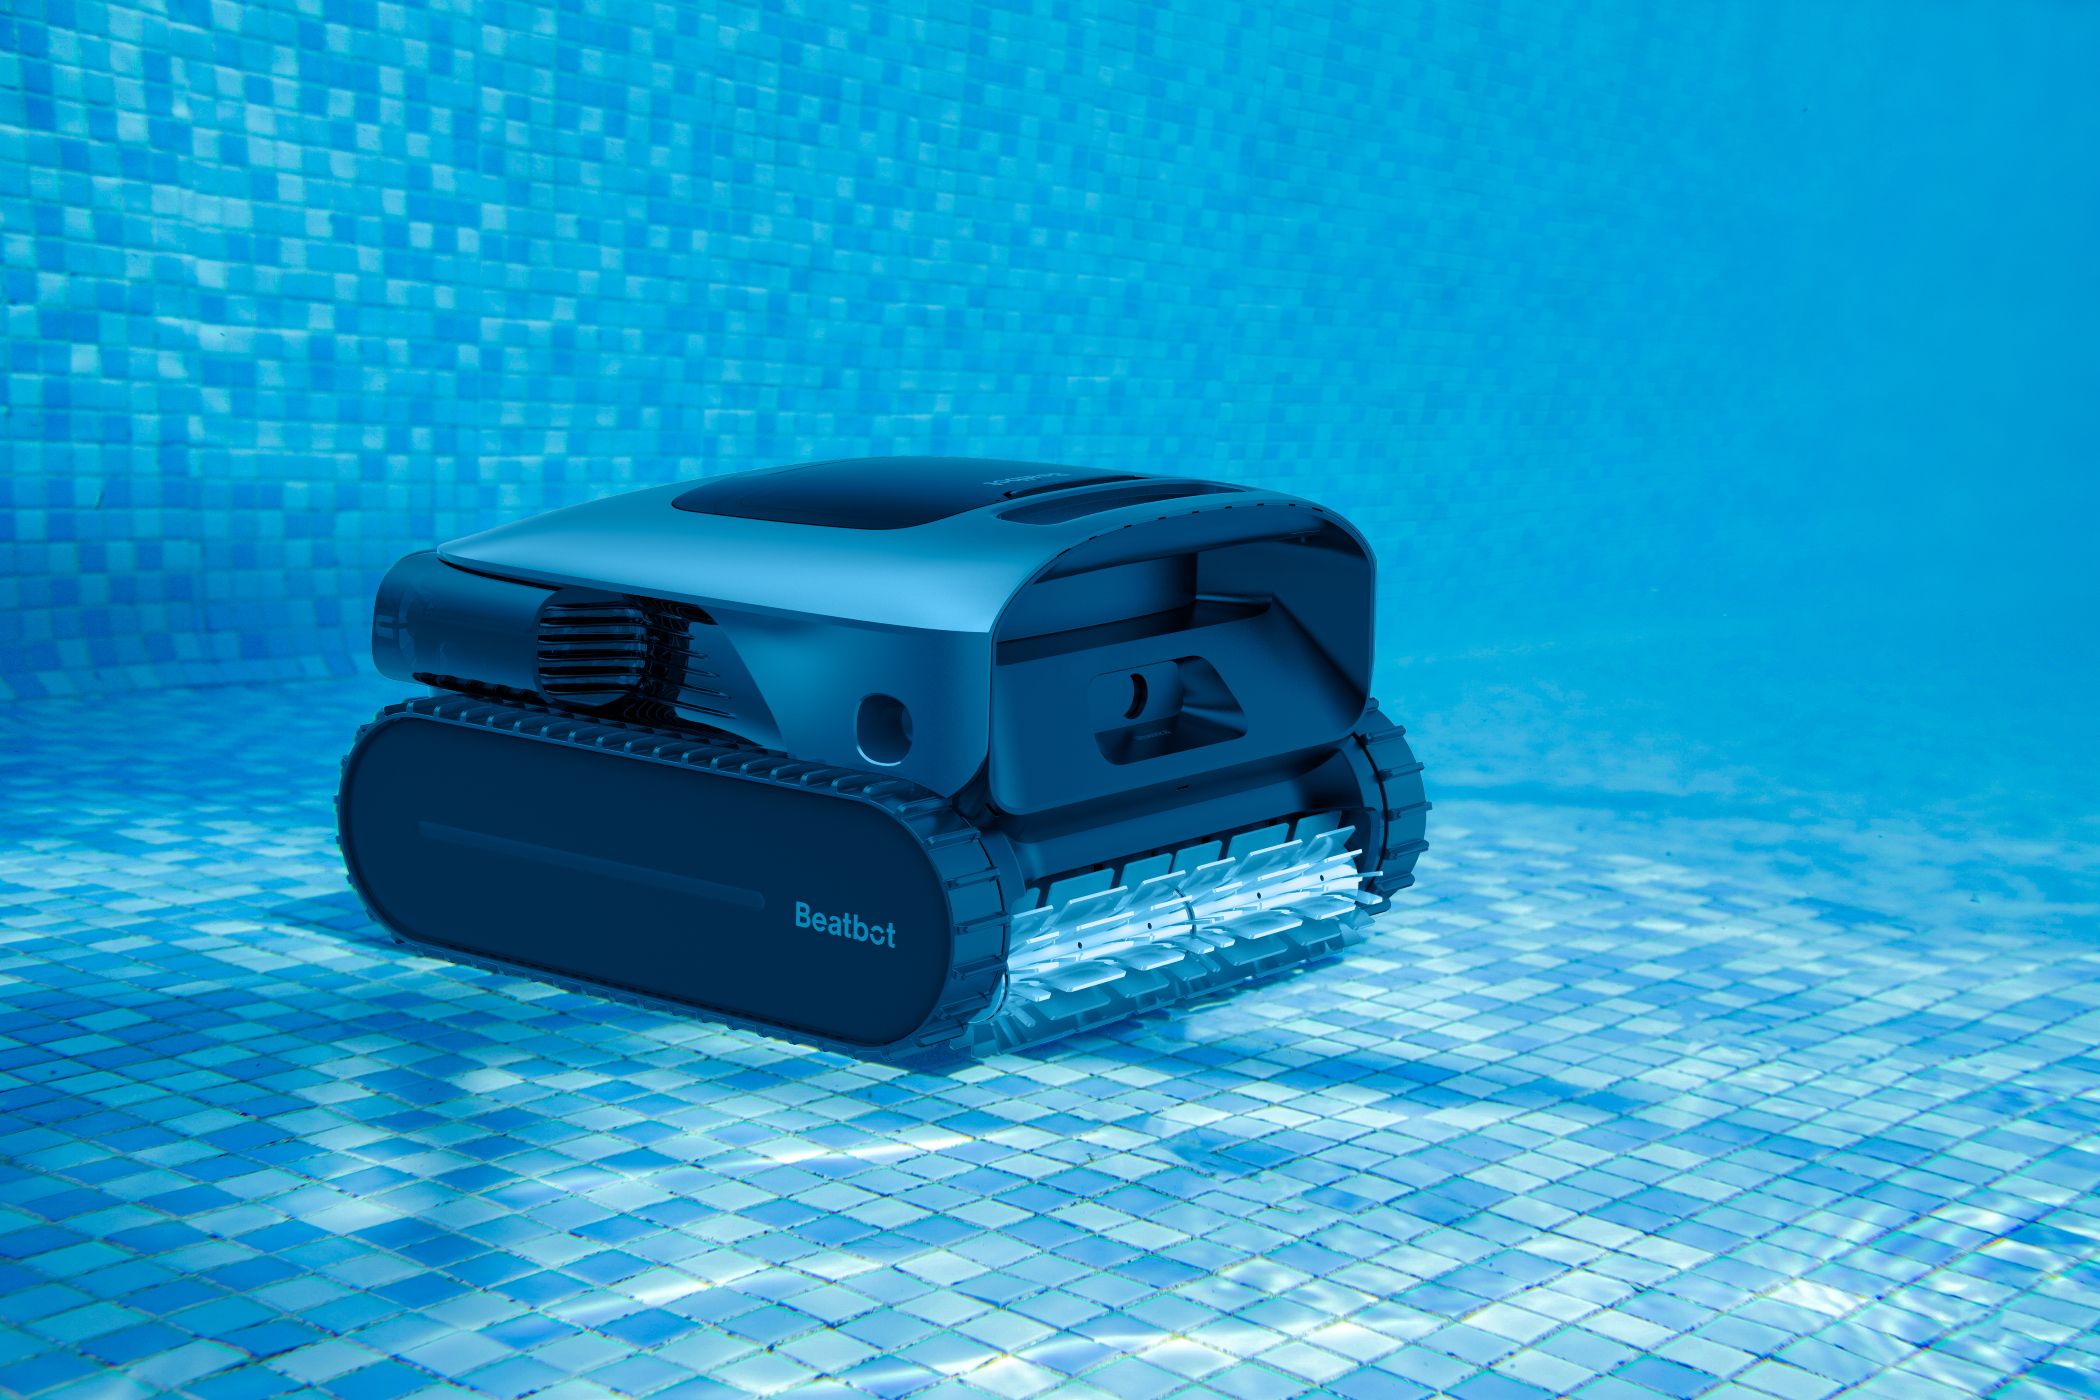 The Beatbot AquaSense Pro Under Water in a Pool